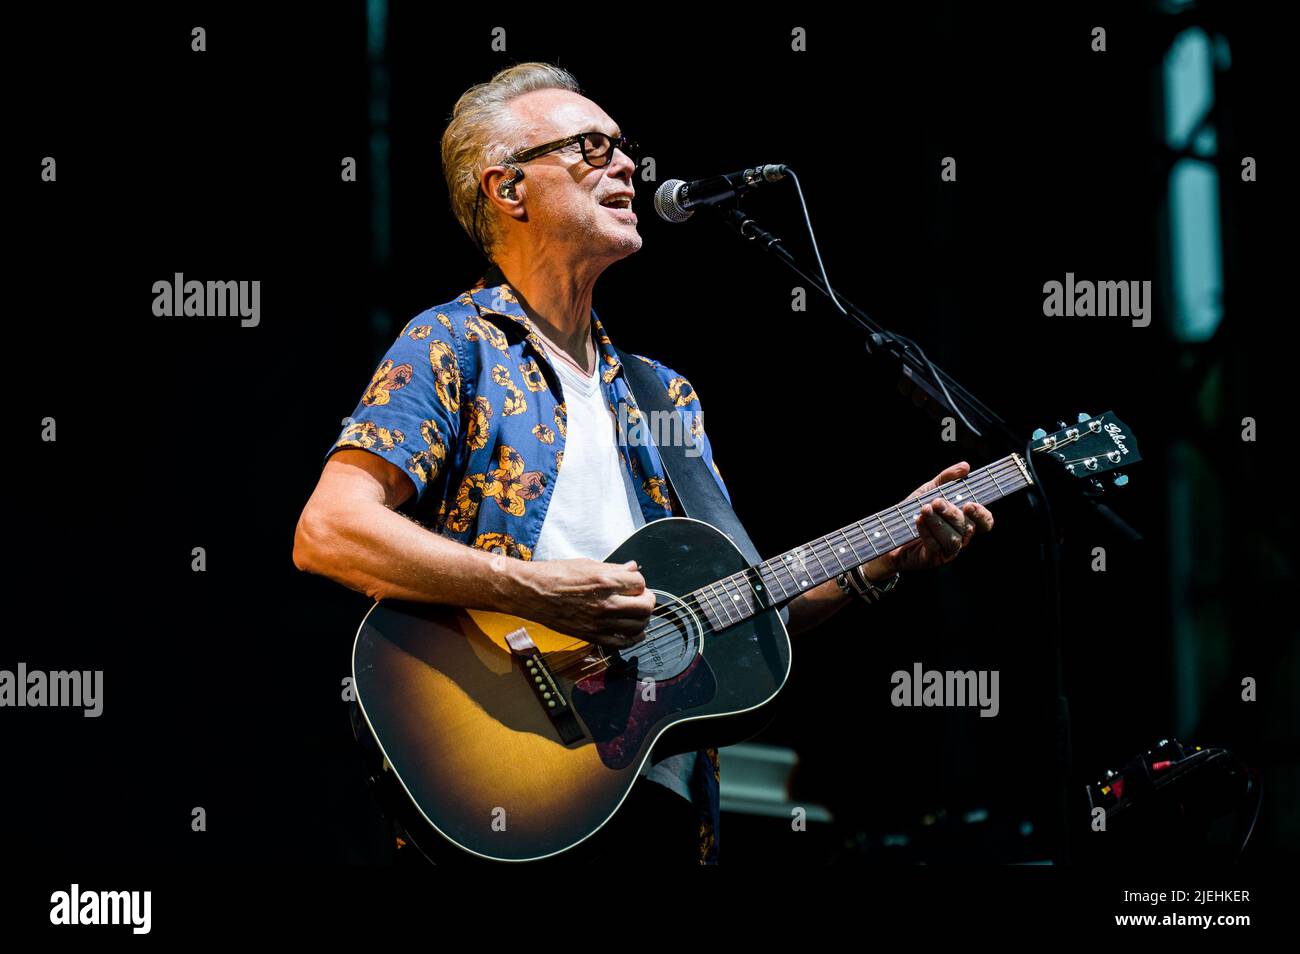 ITALY, STUPINIGI, JUNE 27TH 2022: Gary Kemp, guitarist of the English rock band “Nick Mason's Saucerful of Secrets” performing live on stage the early music of Pink Floyd Stock Photo